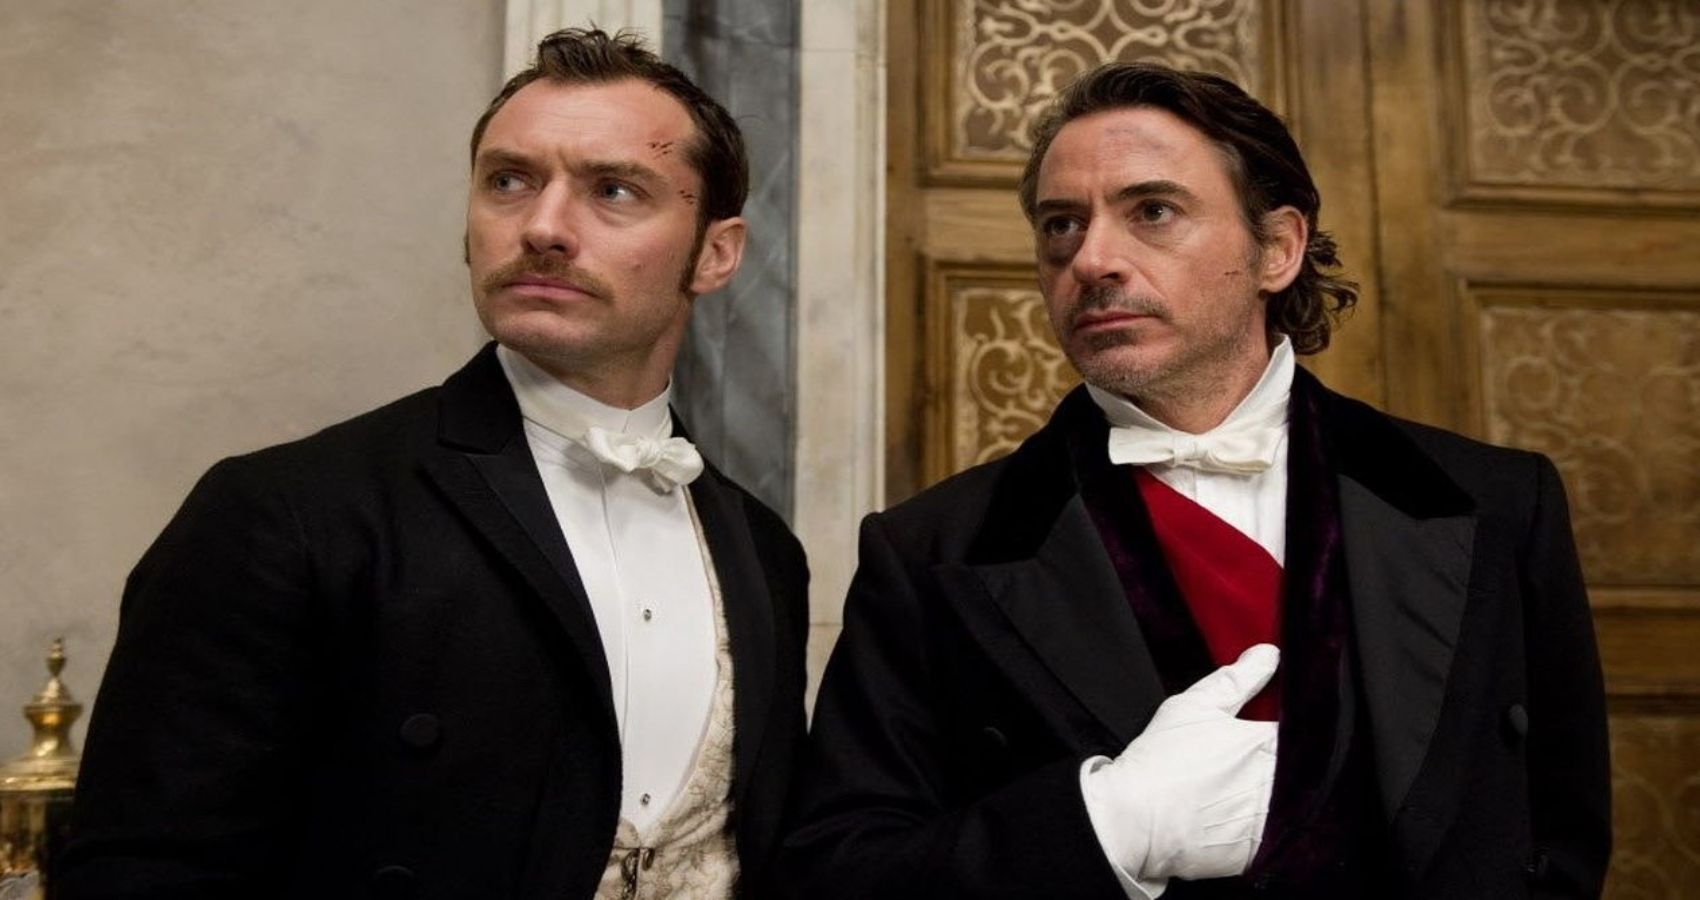 Jude Law and Robert Downey Jr. in Sherlock Holmes A Game of Shadows